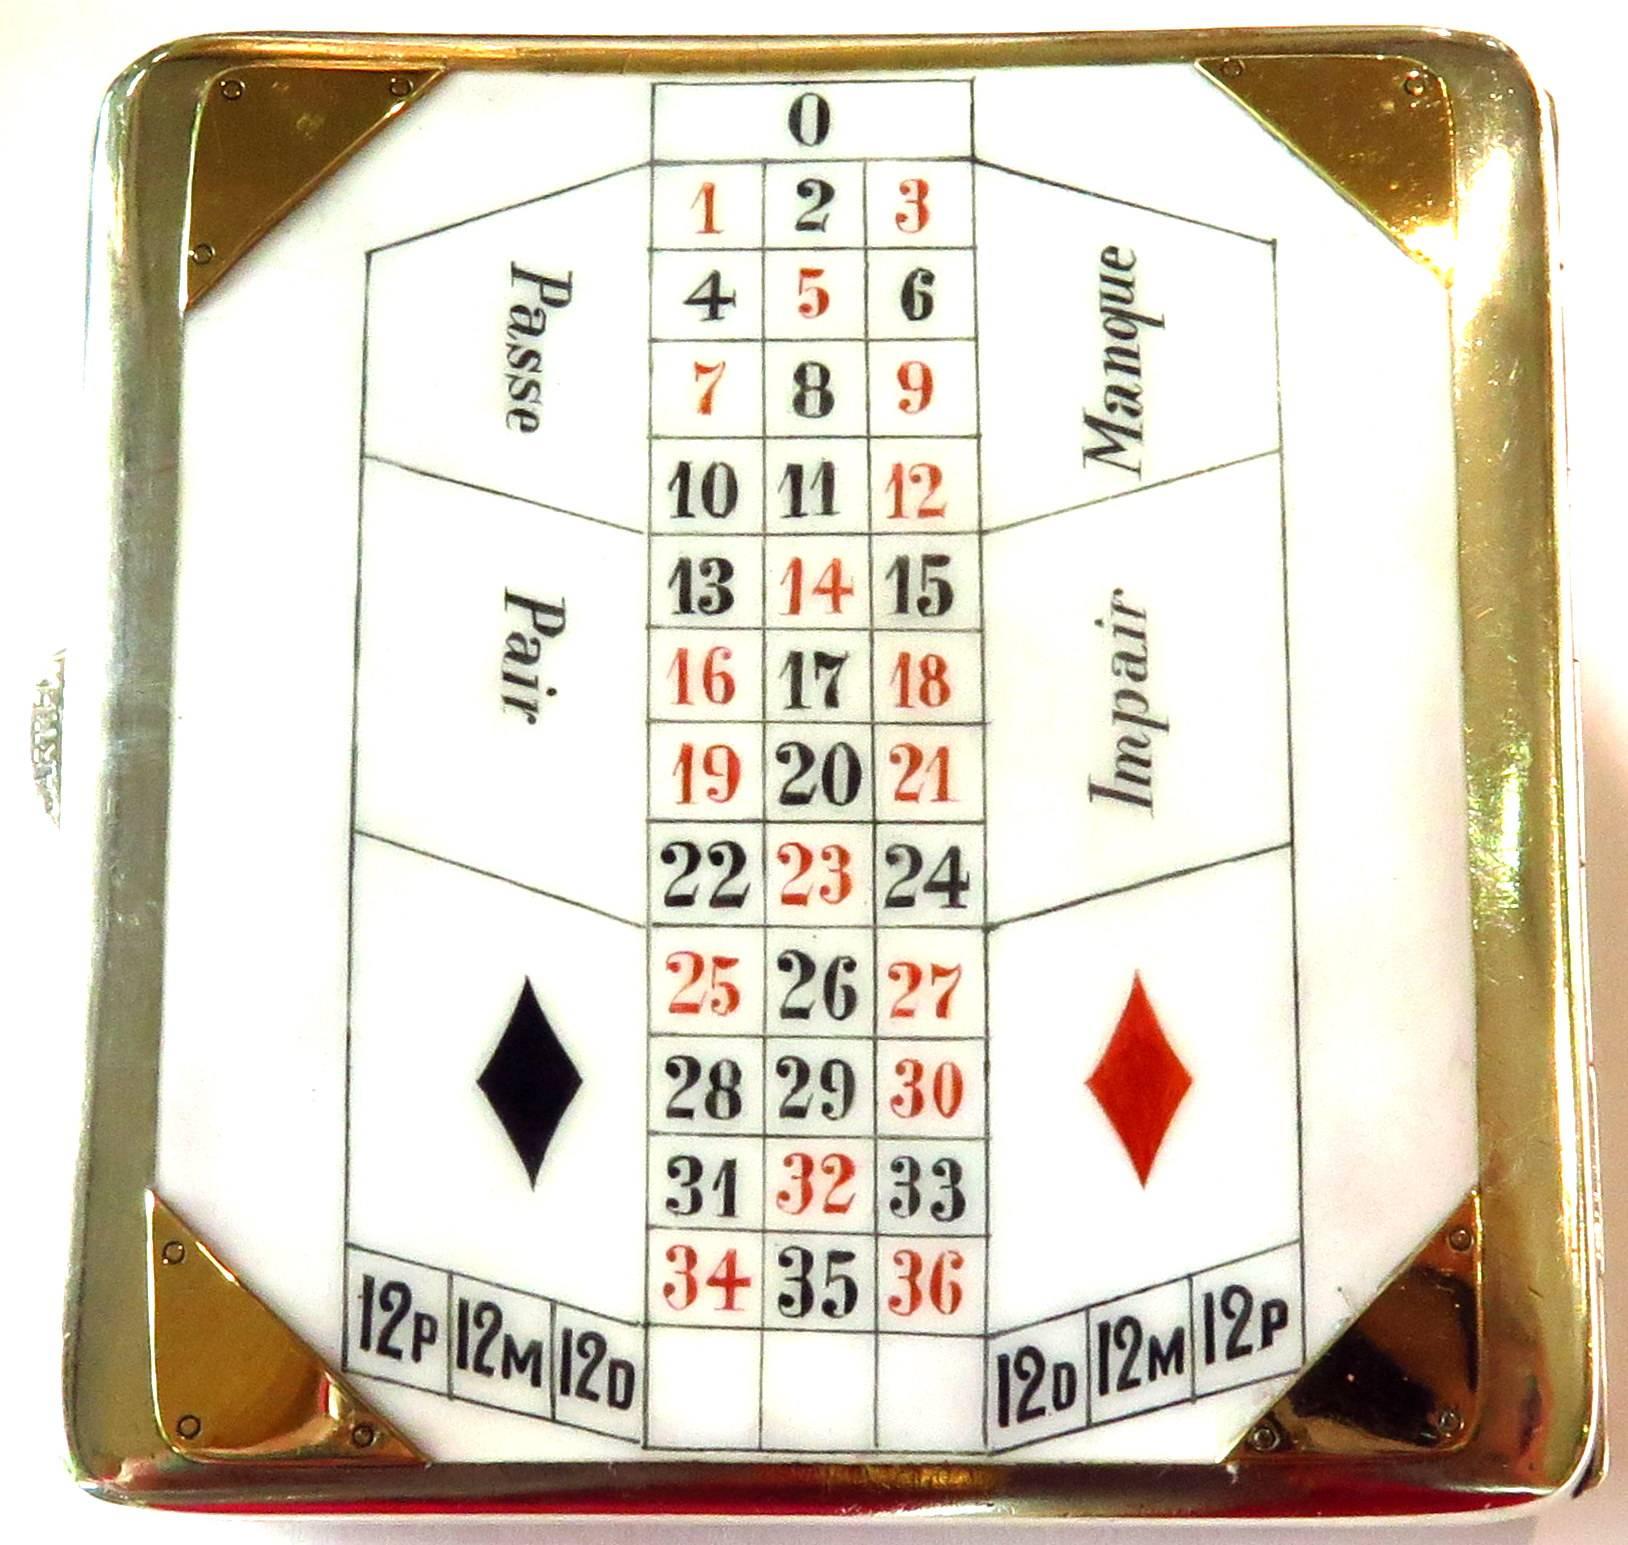 This incredible cigarette box by Cartier is incredibly enameled. The top of the box depicts a roulette wheel with the ball landing on 35 red. The bottom depicts a gambling layout with each of the corners in yellow gold placed to show they are